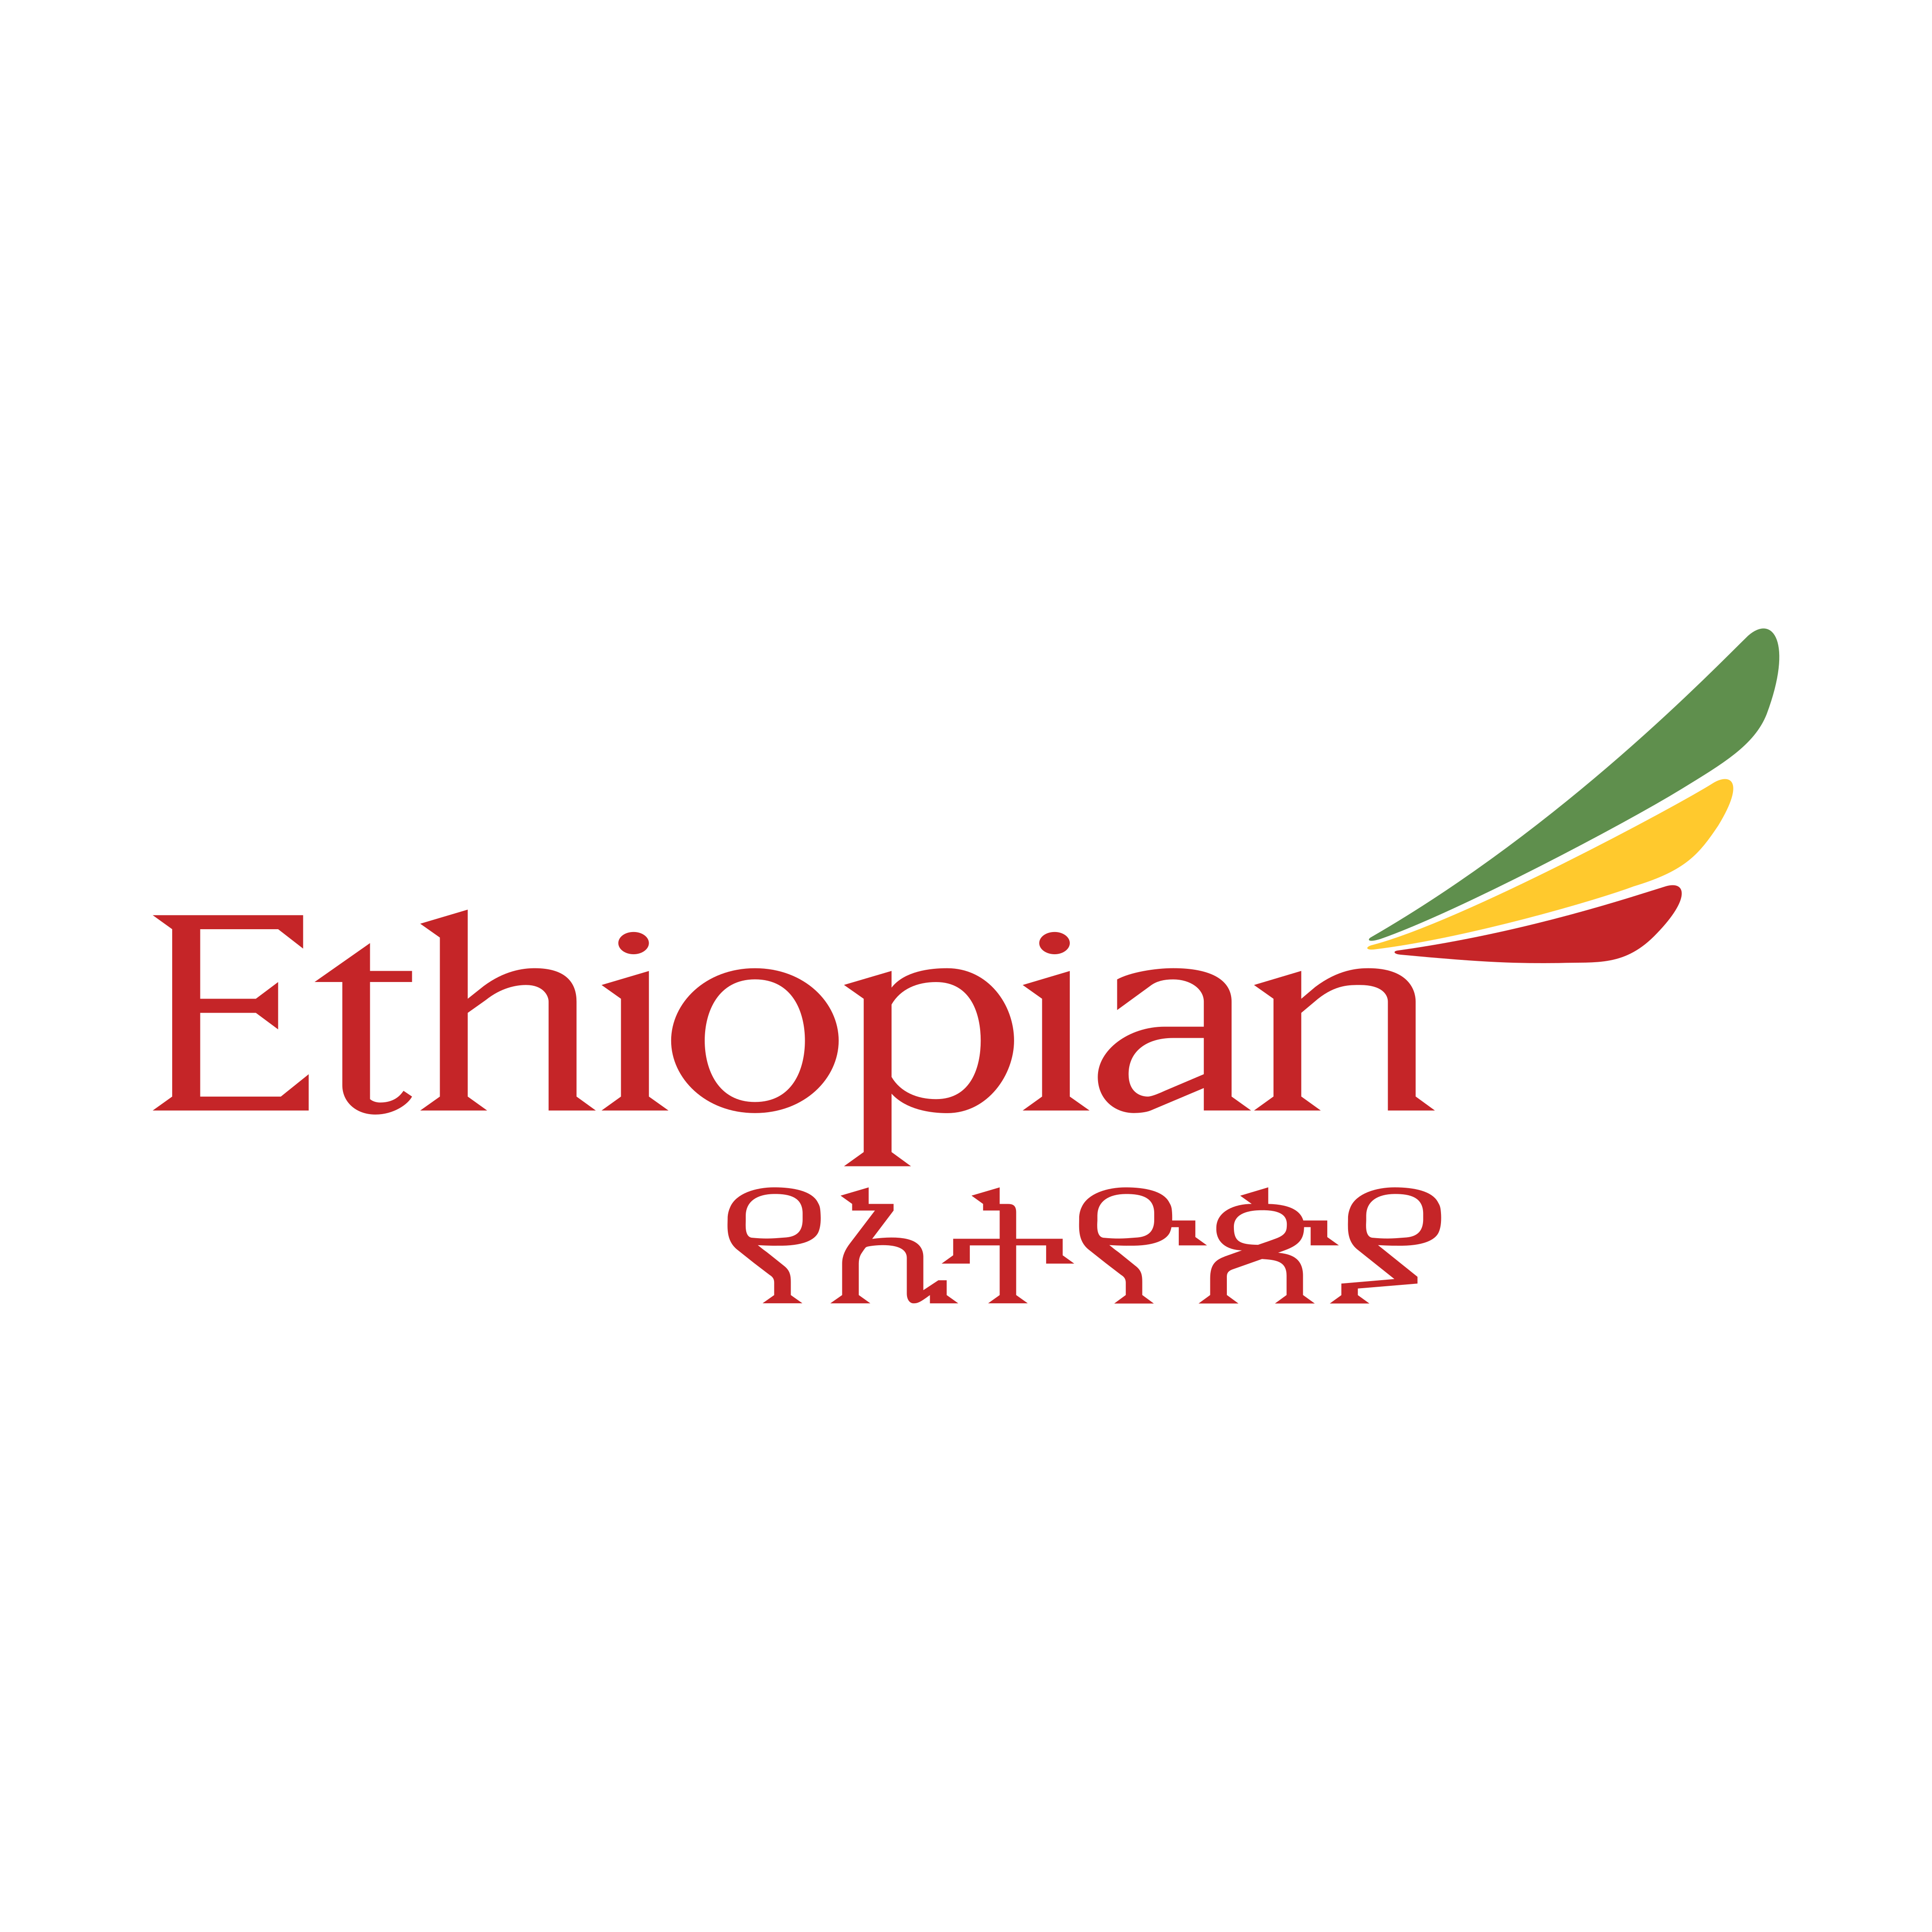 Ethiopian Airlines Logo PNG.